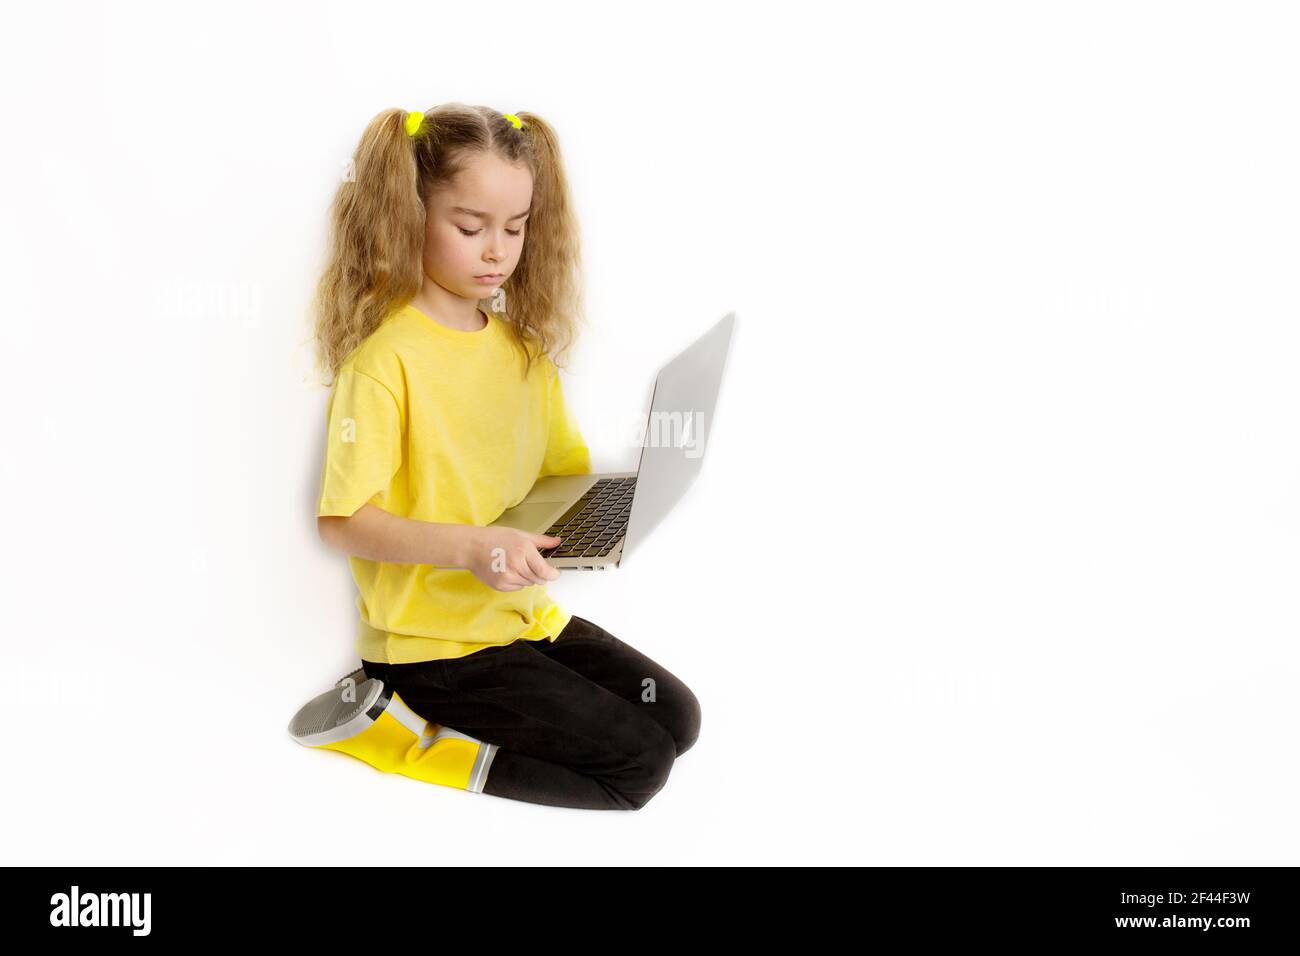 Concentrated cute european girl child in yellow t-shirt sitting with laptop checking tasks in online class, e-learning distance learning concept. Stock Photo